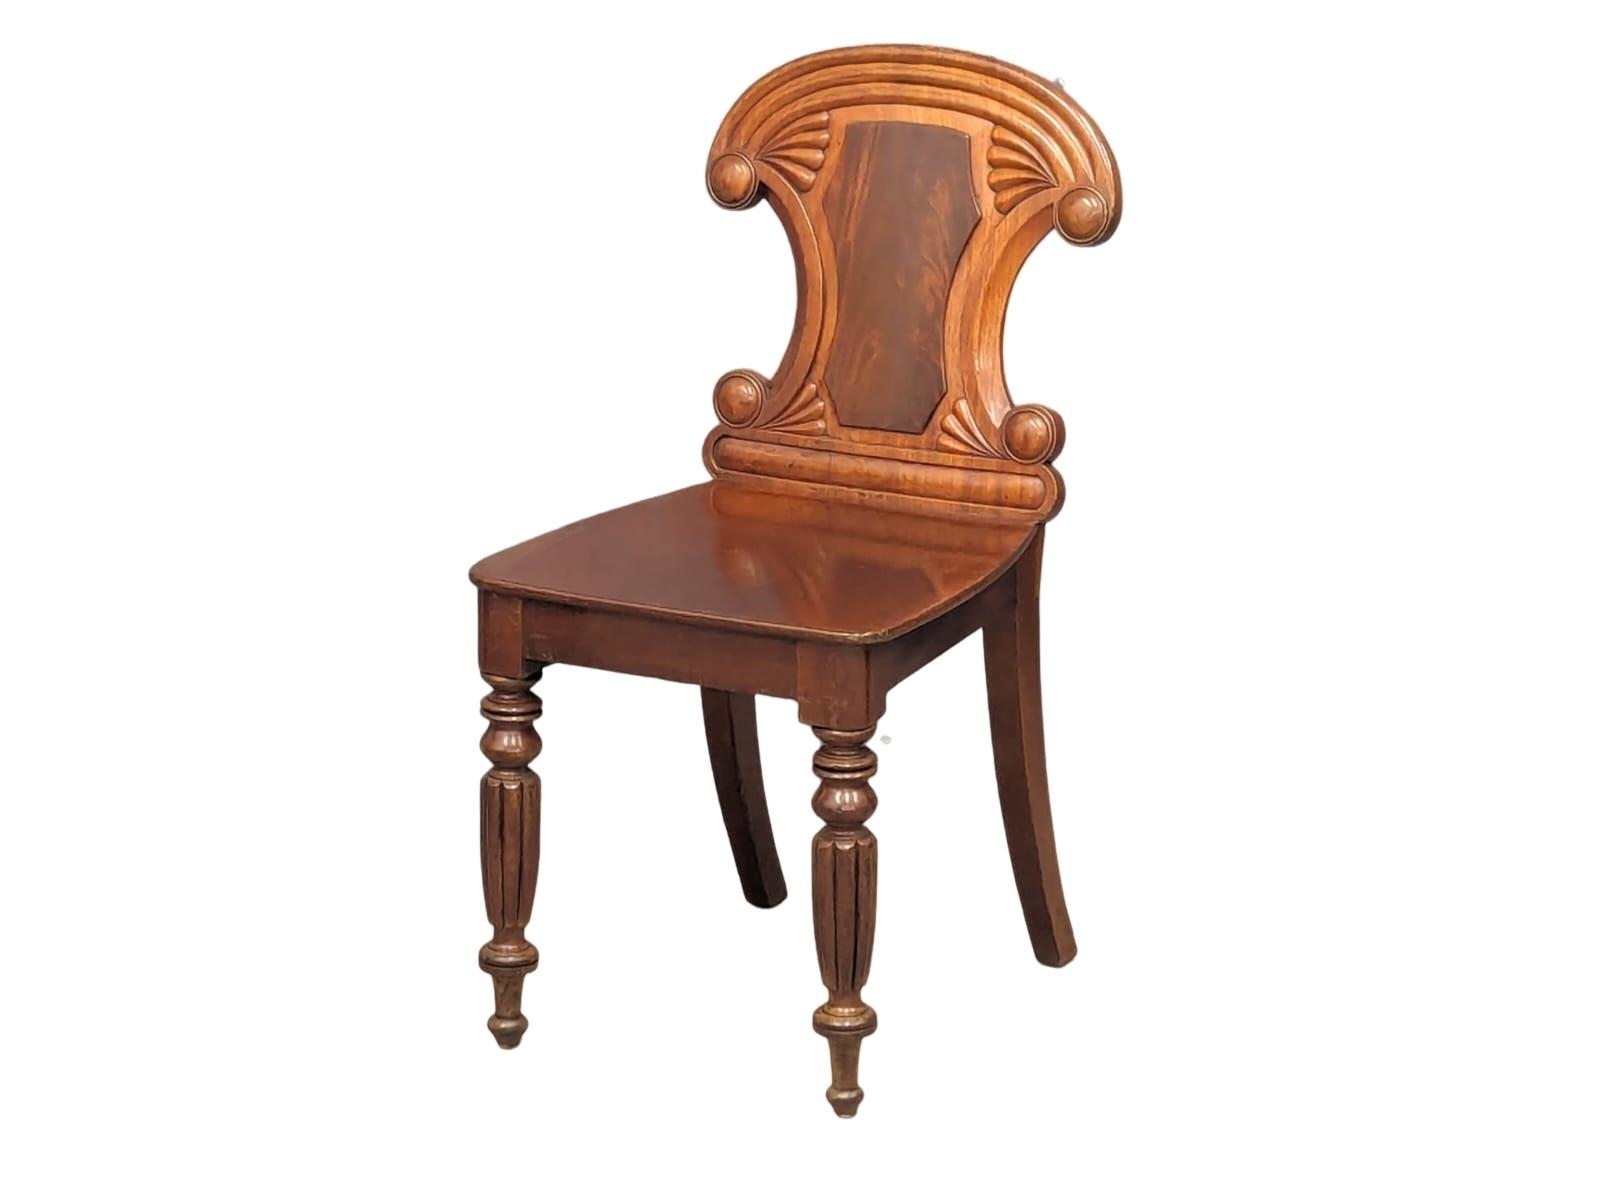 A pair of late George IV-Early William IV ornate mahogany hall chairs - Image 4 of 6